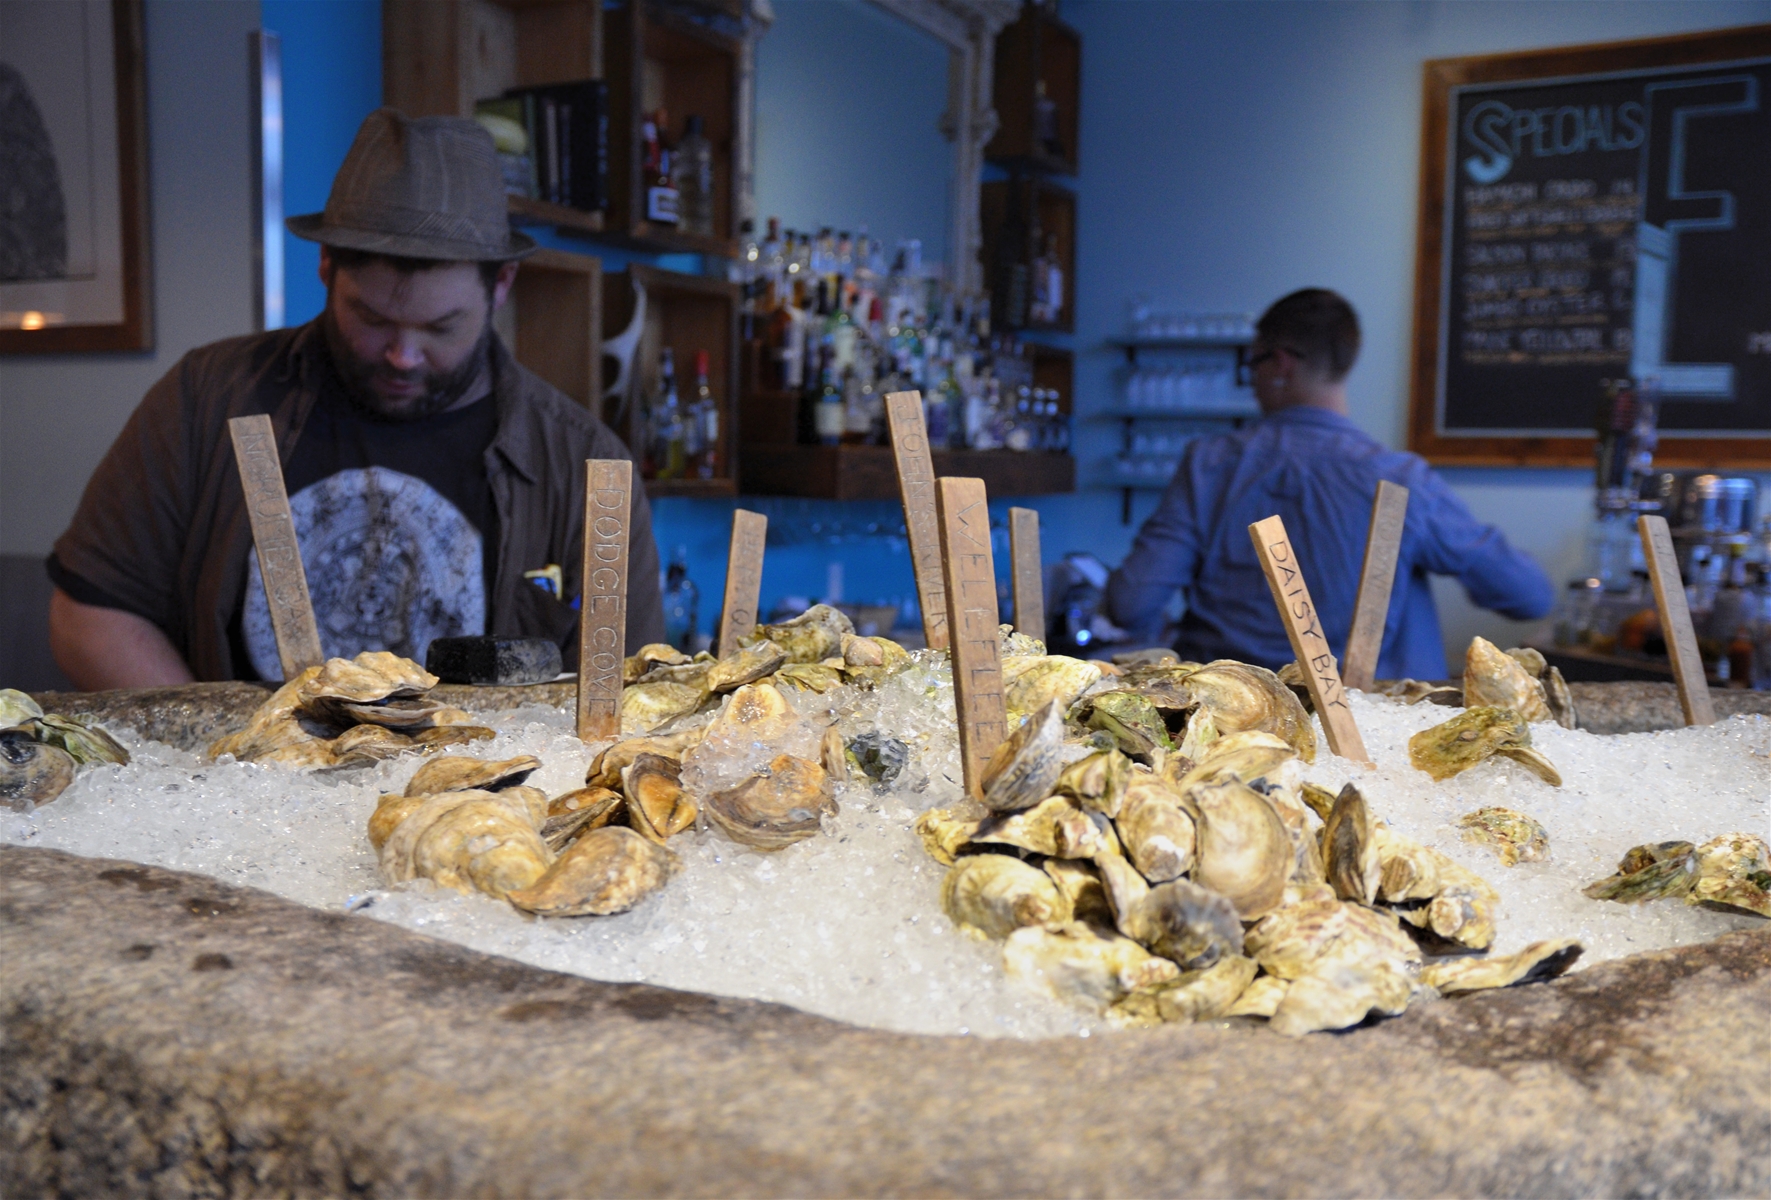 Eventide Oyster Co.